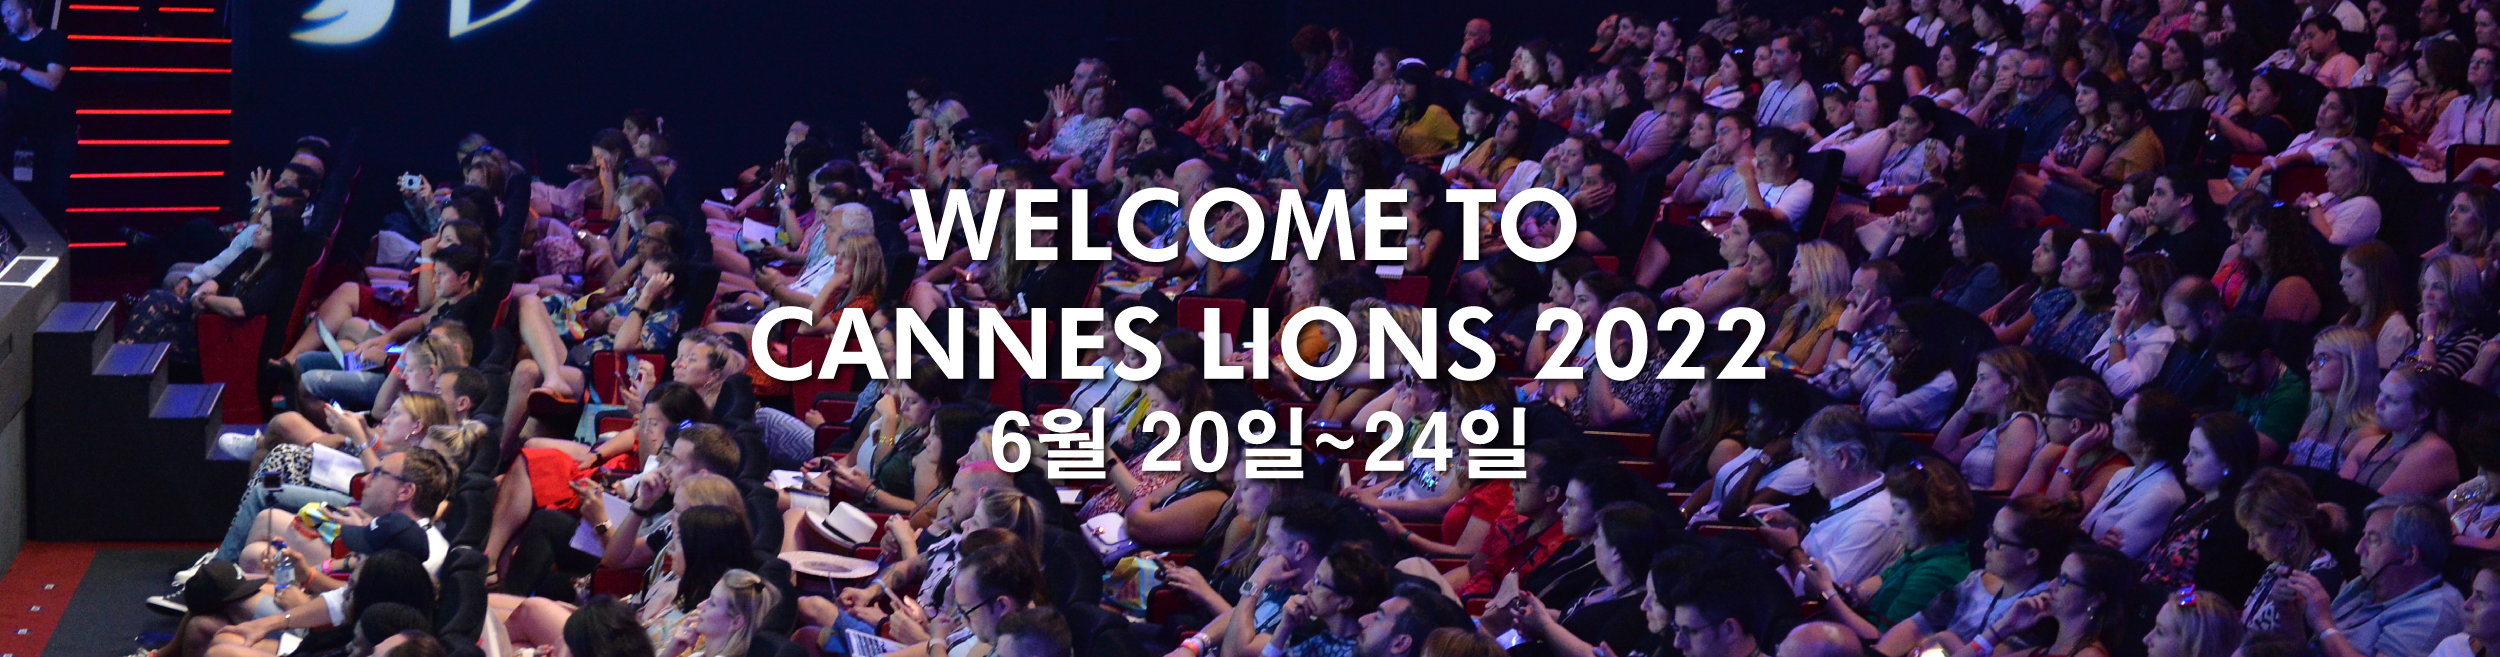 WELCOME TO CANNES LIONS 2022